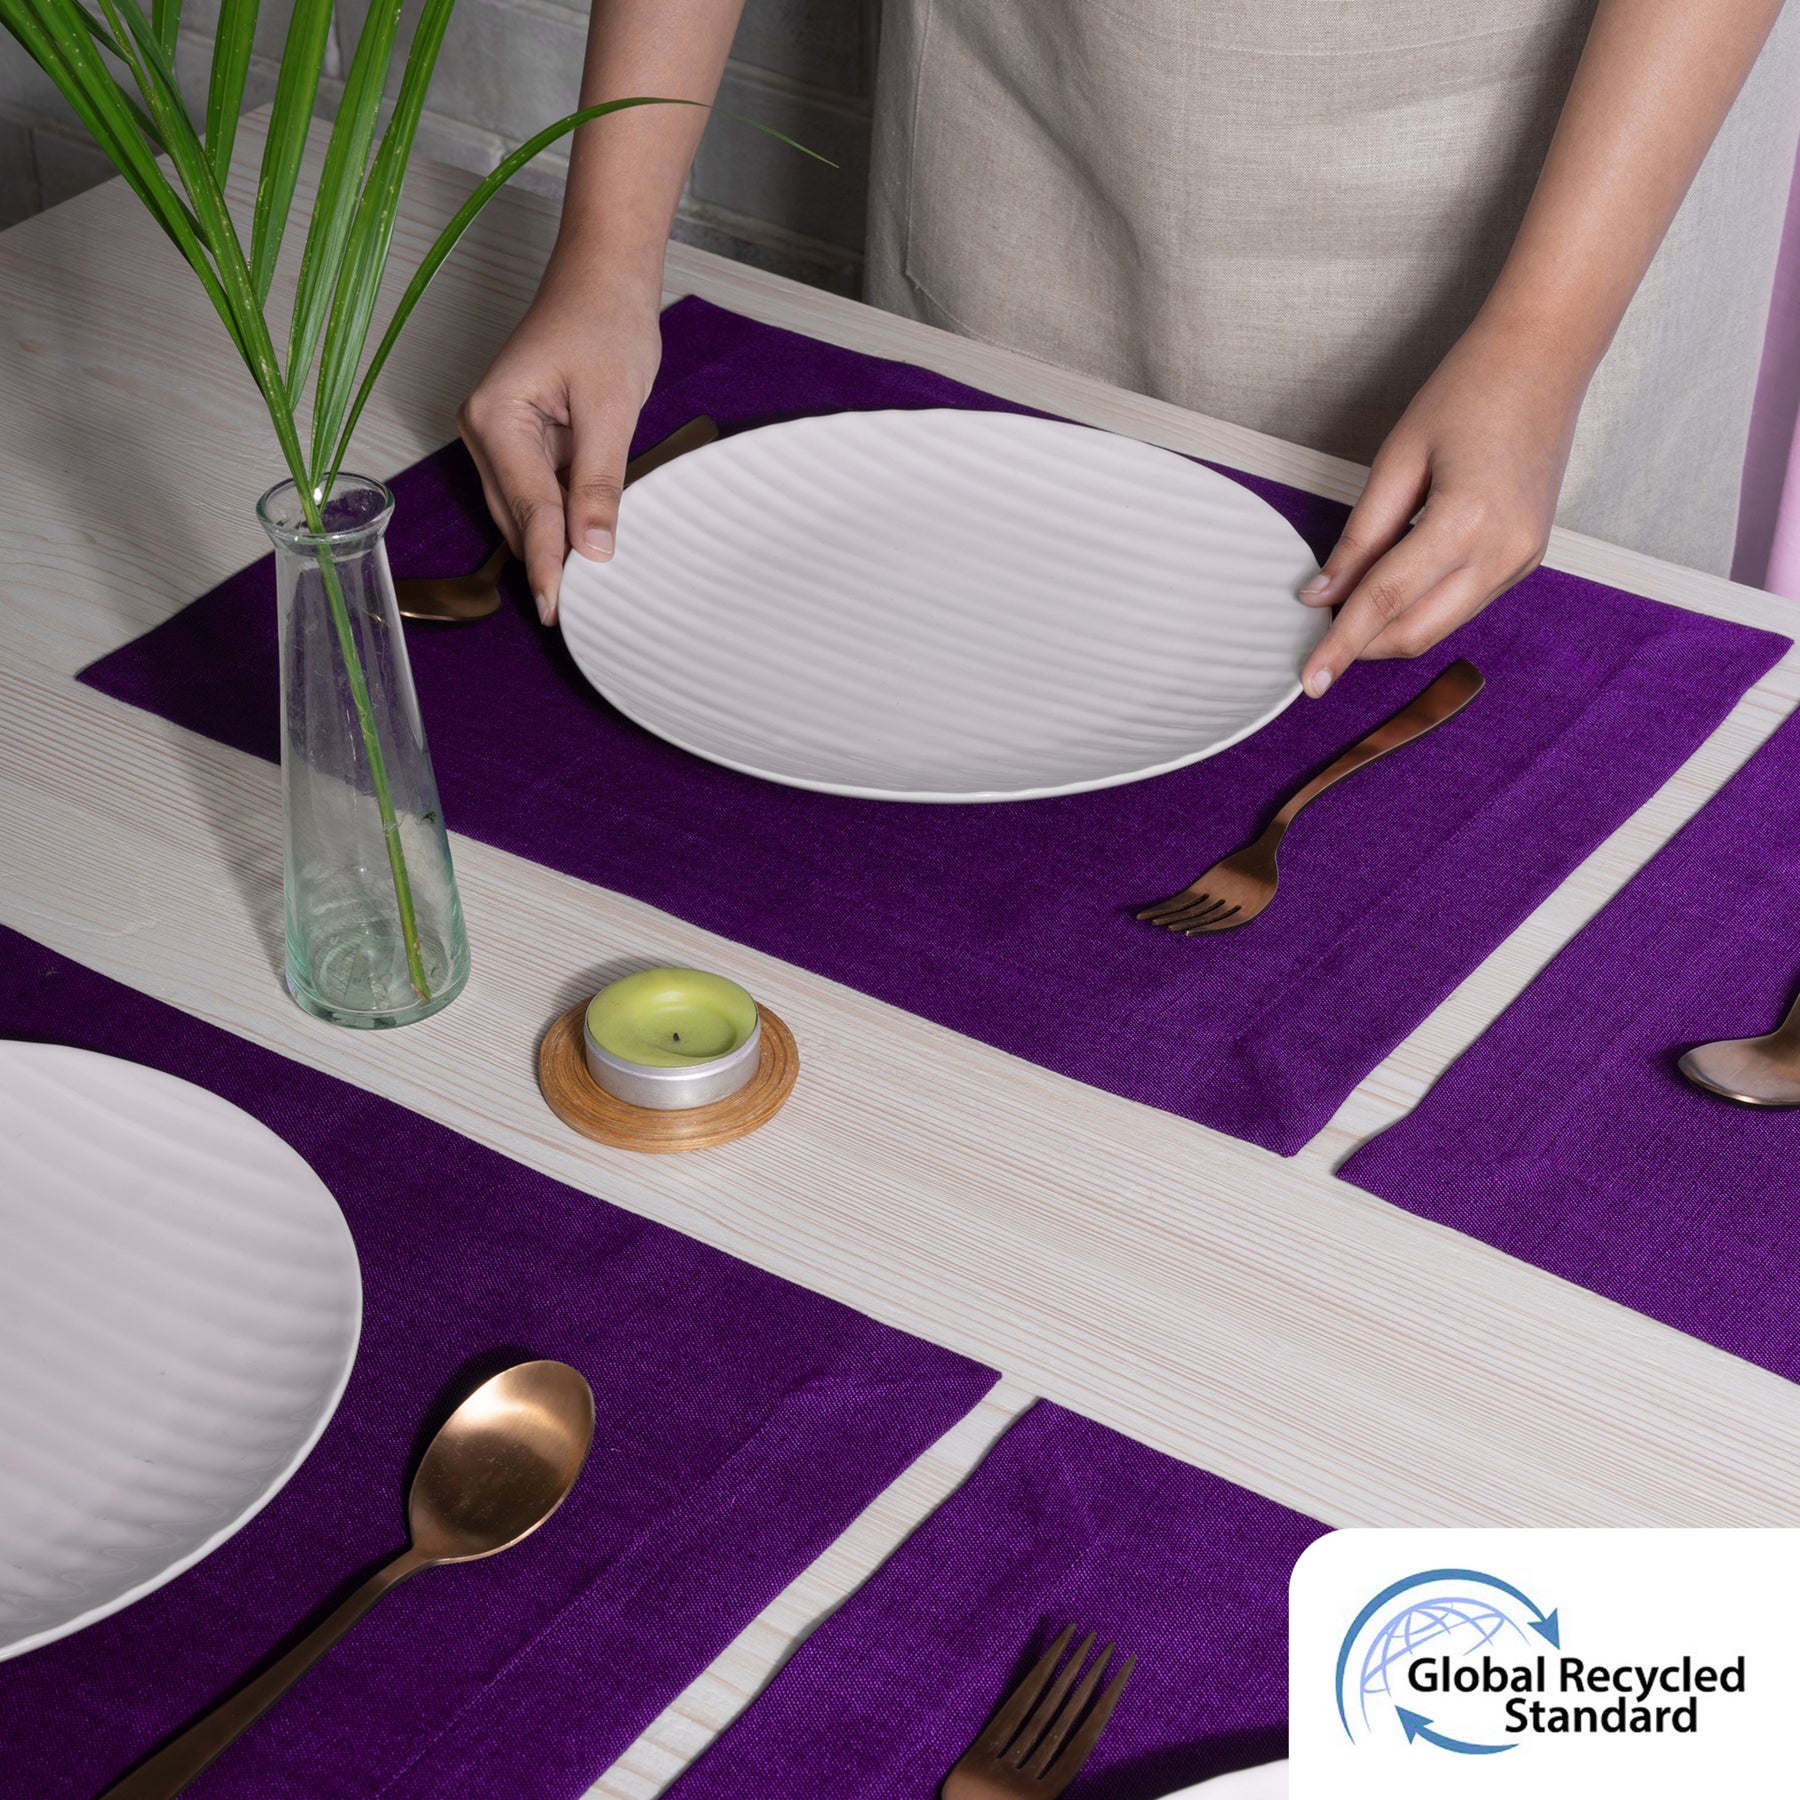 Purple Linen Look Recycled Fabric Mitered Corner Placemats